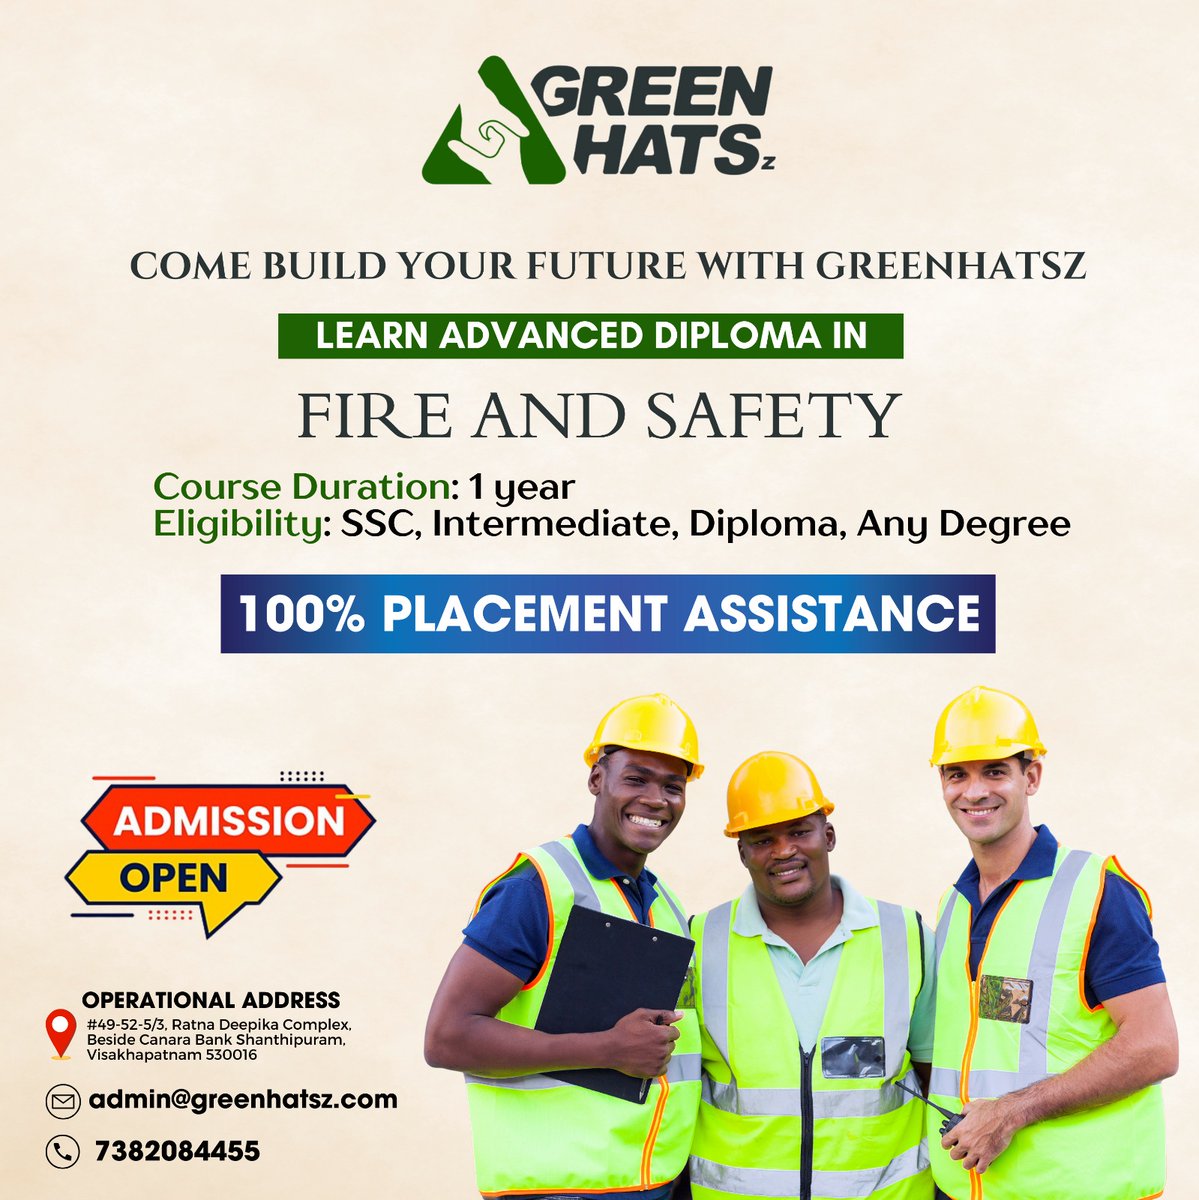 Unlock your future potential with GreenHatsz! Join us to pursue an Advanced Diploma in Fire and Safety, empowering yourself with essential skills for a safer world.
#Greenhatsz #FireSafetyDiploma #SafetyTraining #FirePrevention #EmergencyResponse #RiskAssessment